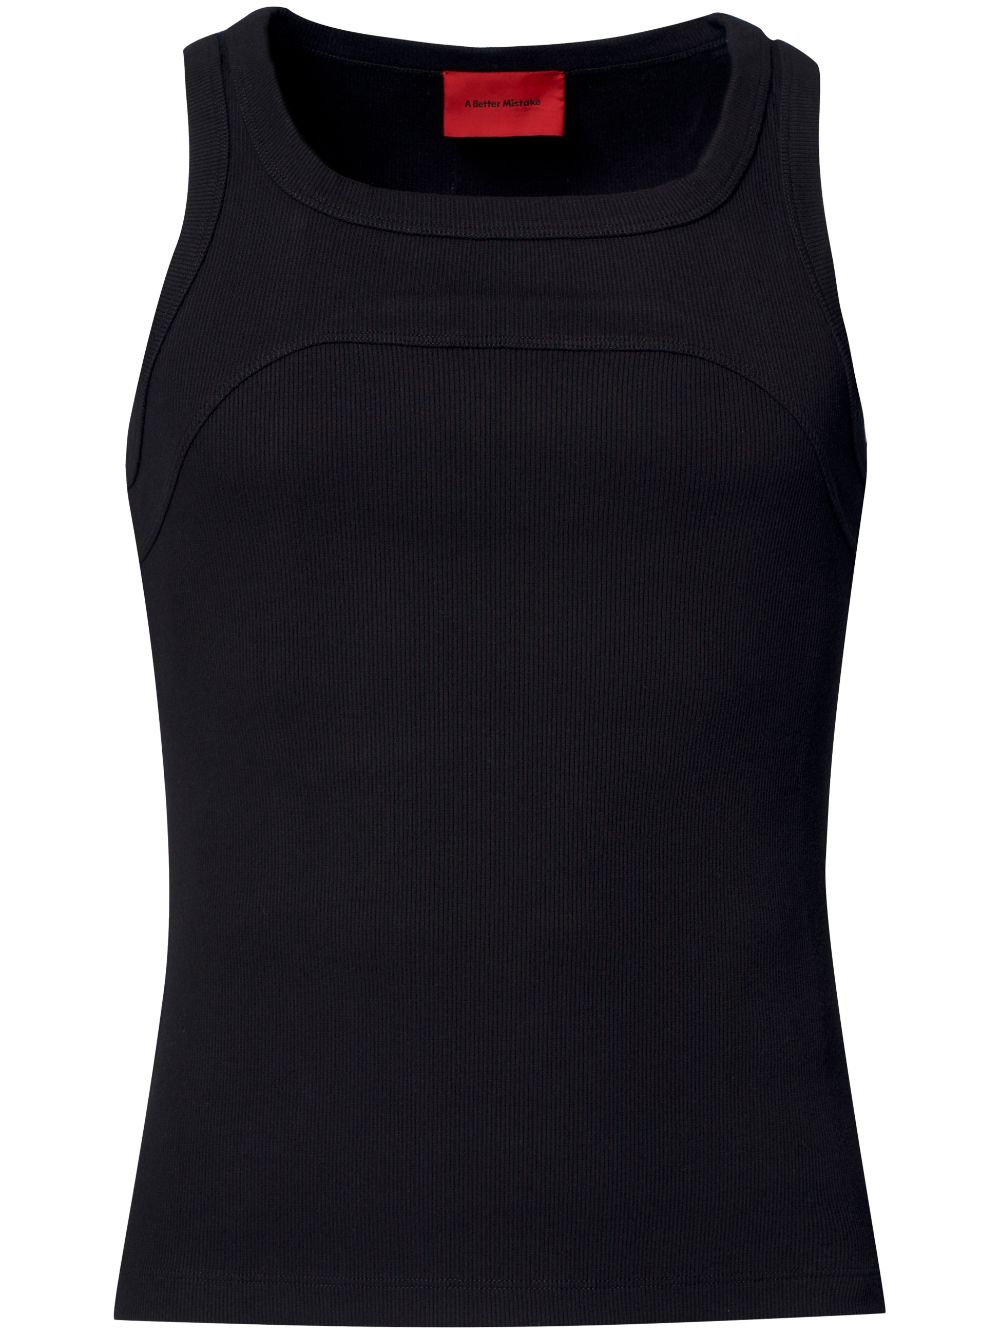 A BETTER MISTAKE Exposed ribbed tank top - Black